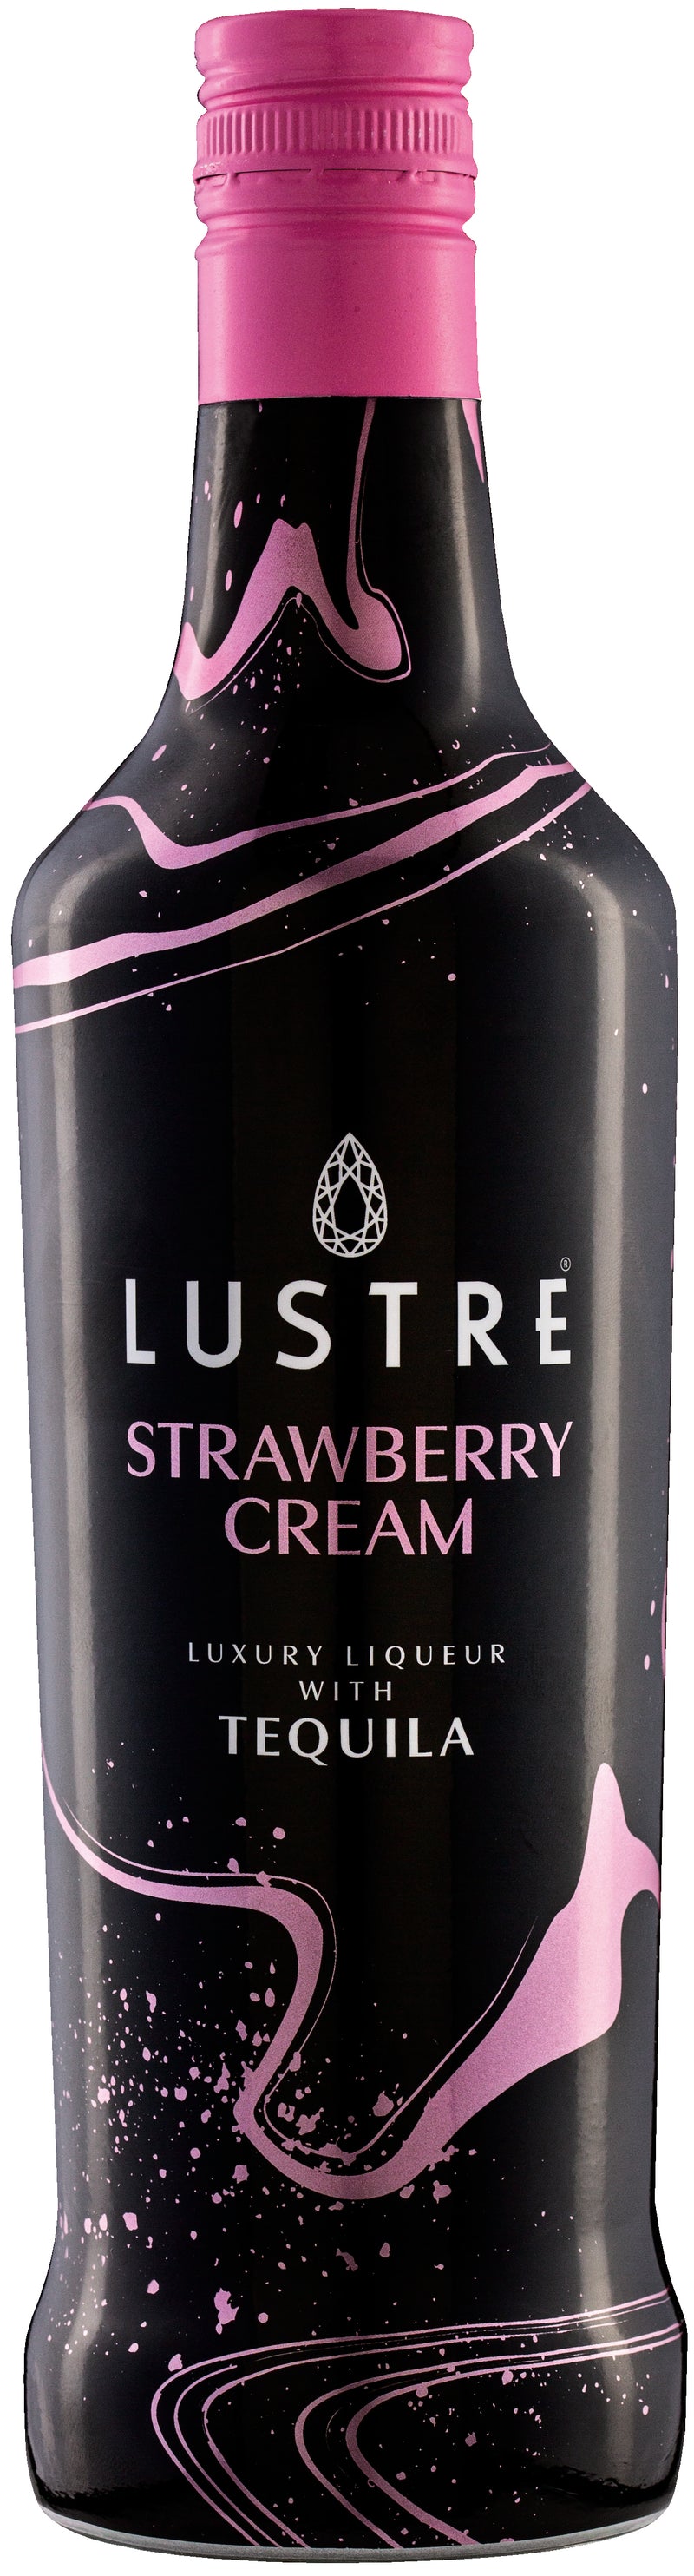 Lustre Strawberry Cream with Tequila 70cl